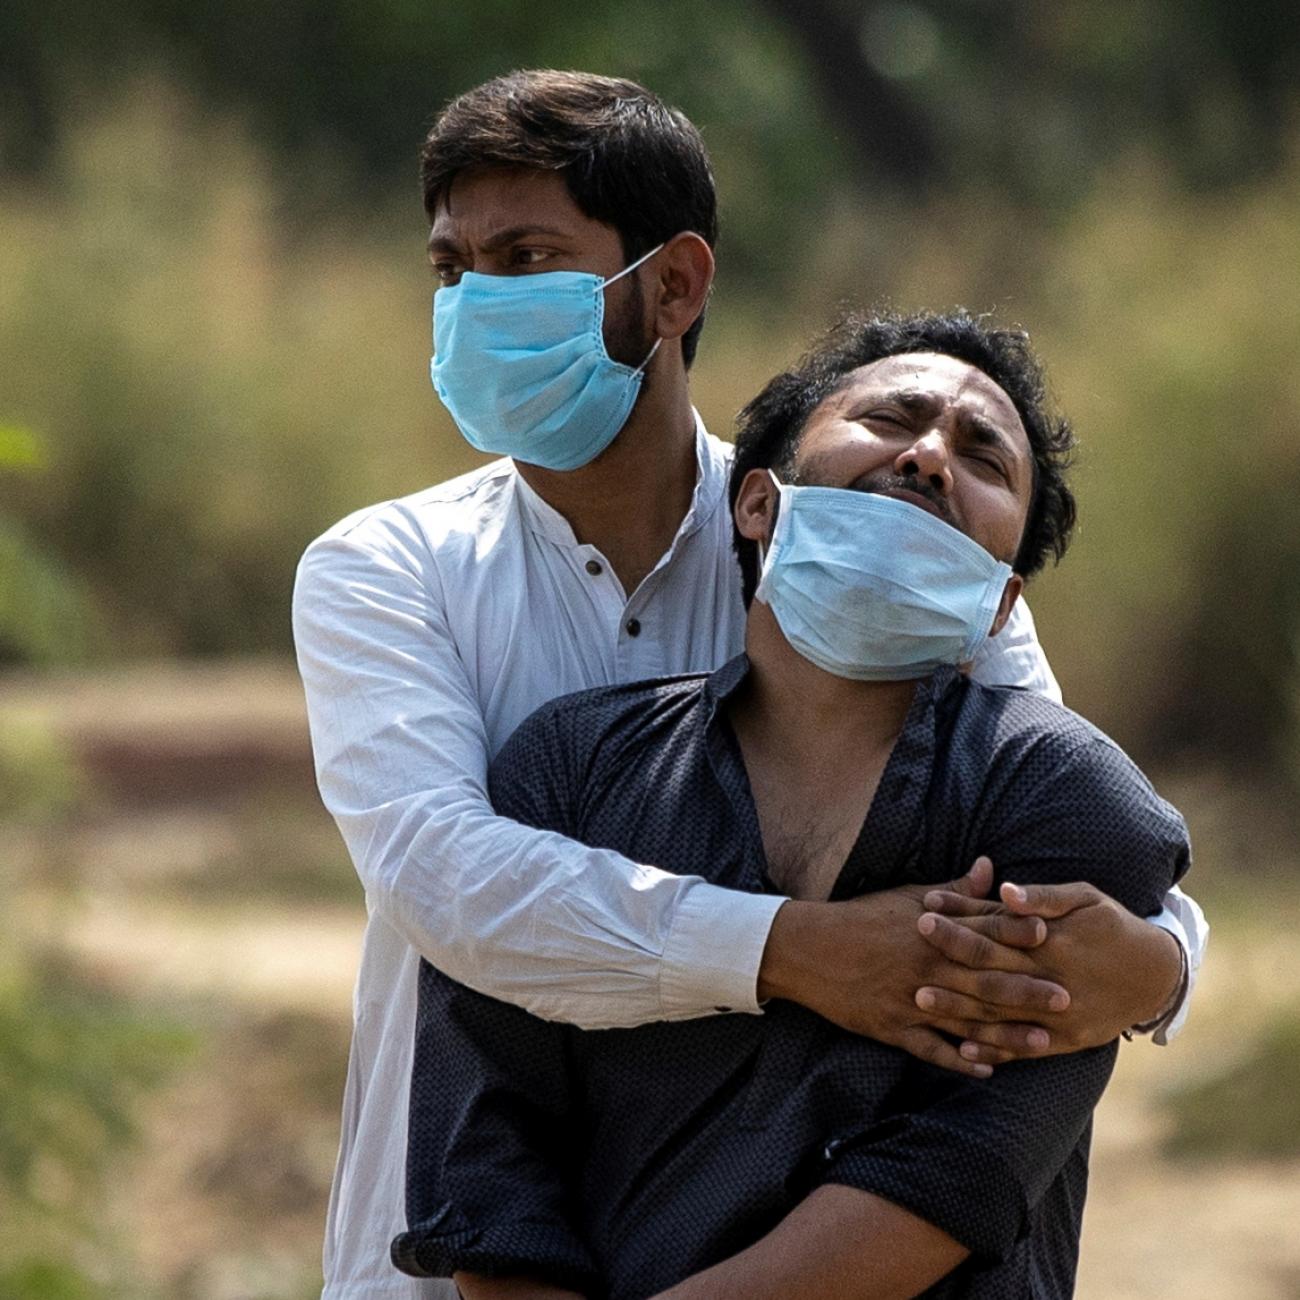 A young man in a white shirt wearing a blue surgical mask hugs his brother, wearing navy blue, as he wails mourning the loss of his father from COVID-19